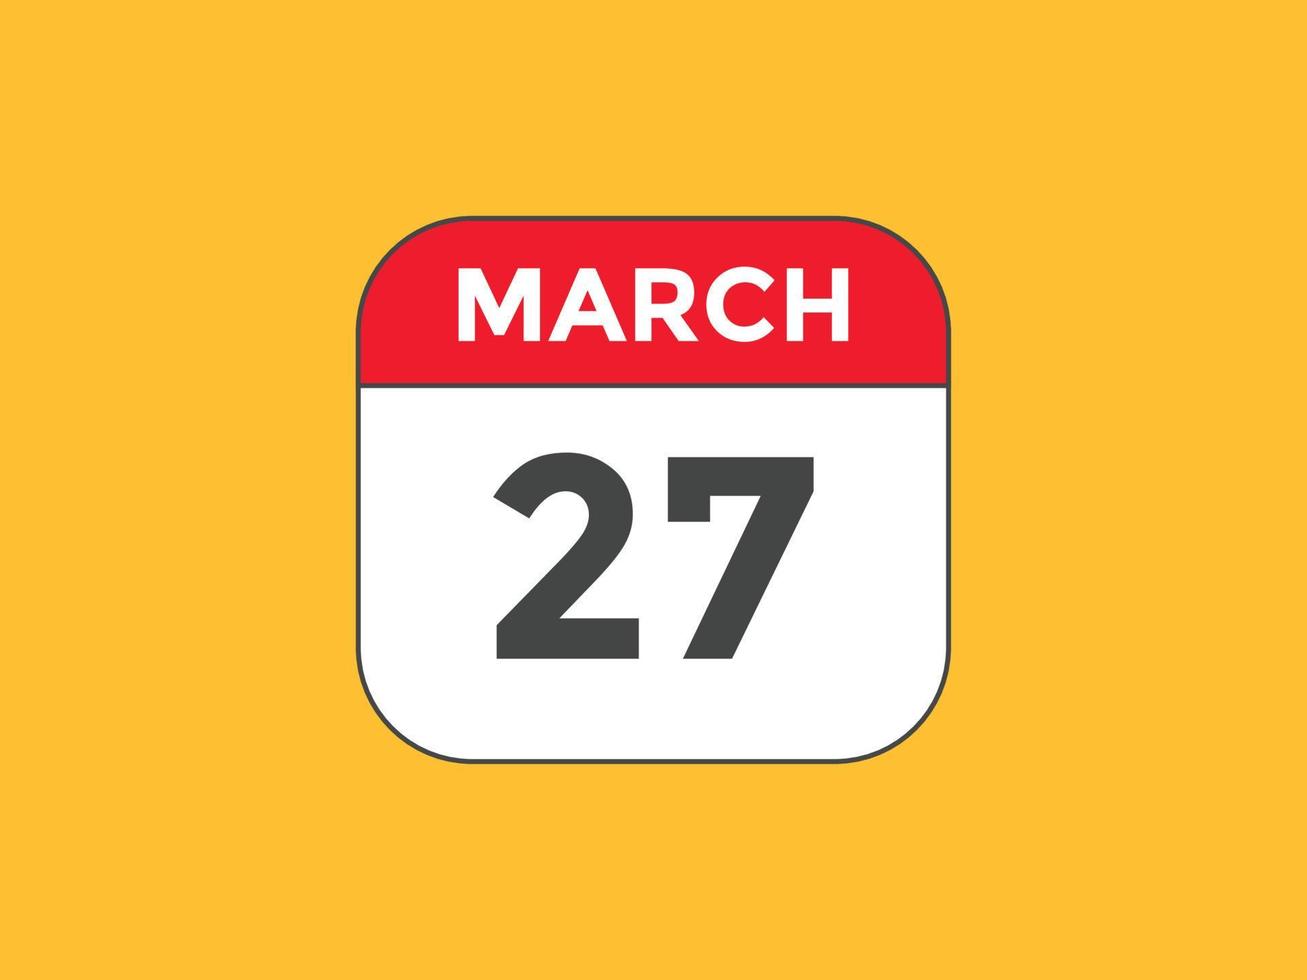 march 27 calendar reminder. 27th march daily calendar icon template. Calendar 27th march icon Design template. Vector illustration